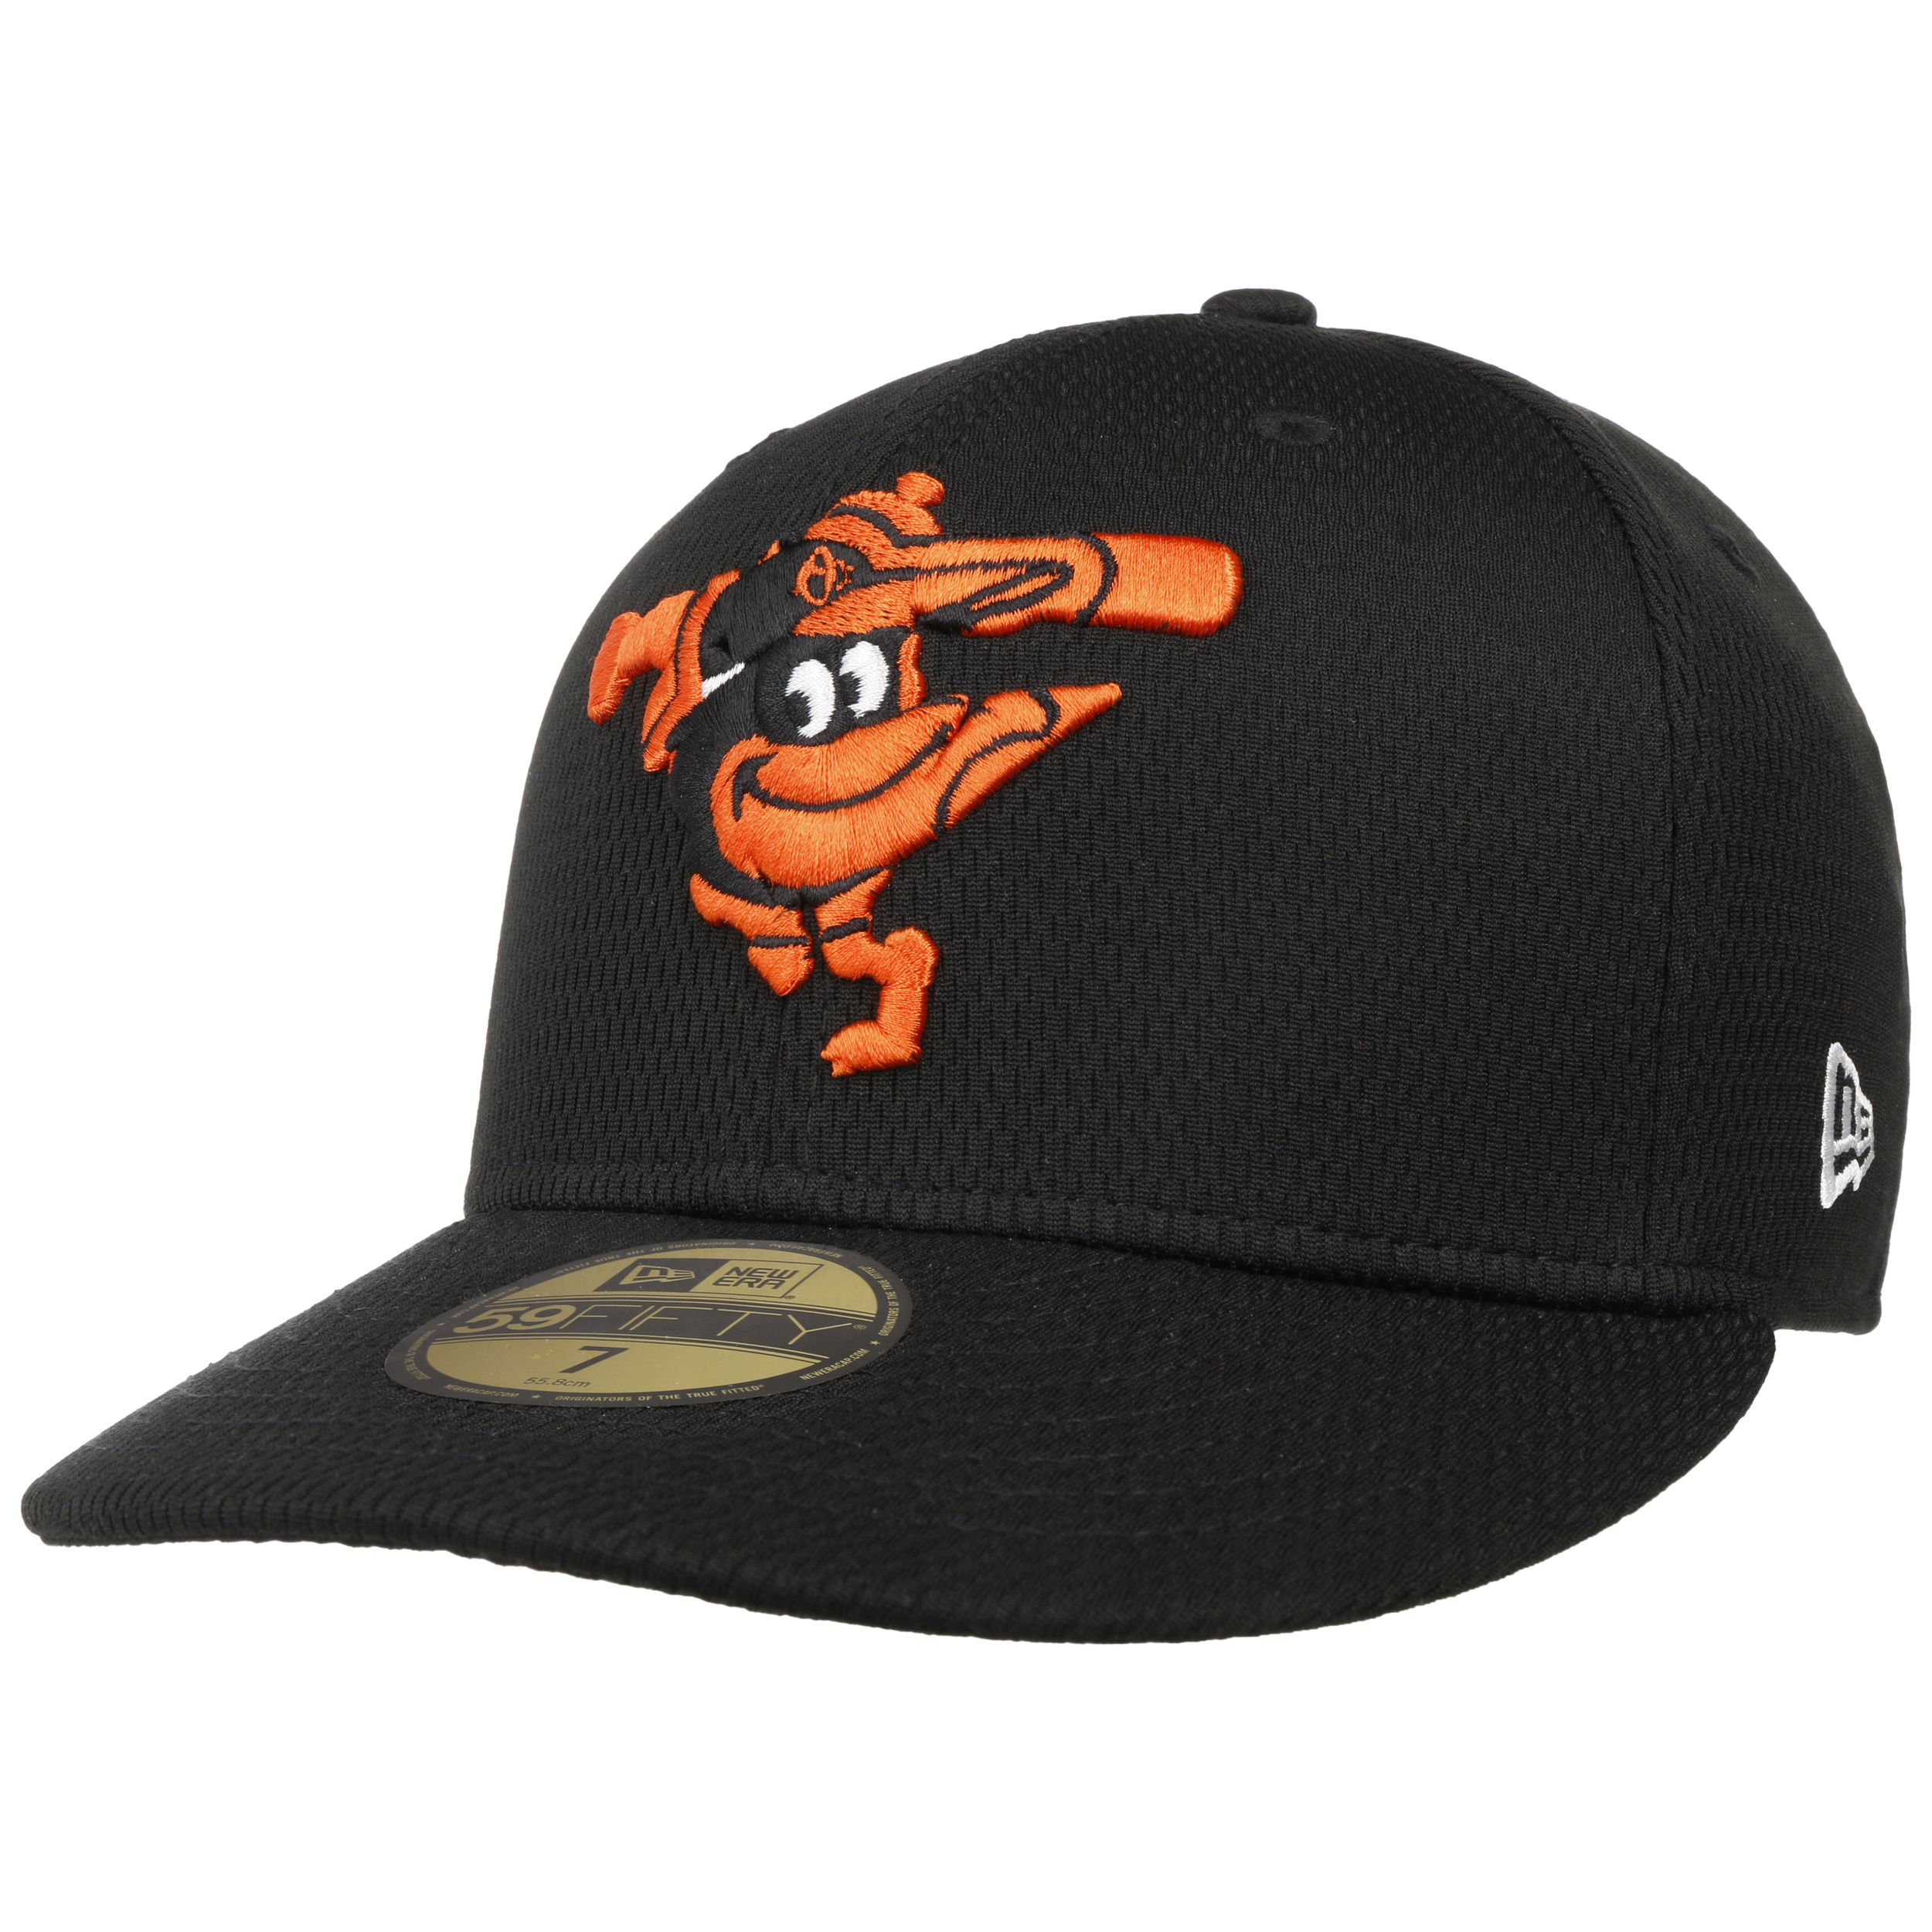 59Fifty Batting Practice Orioles Cap by New Era